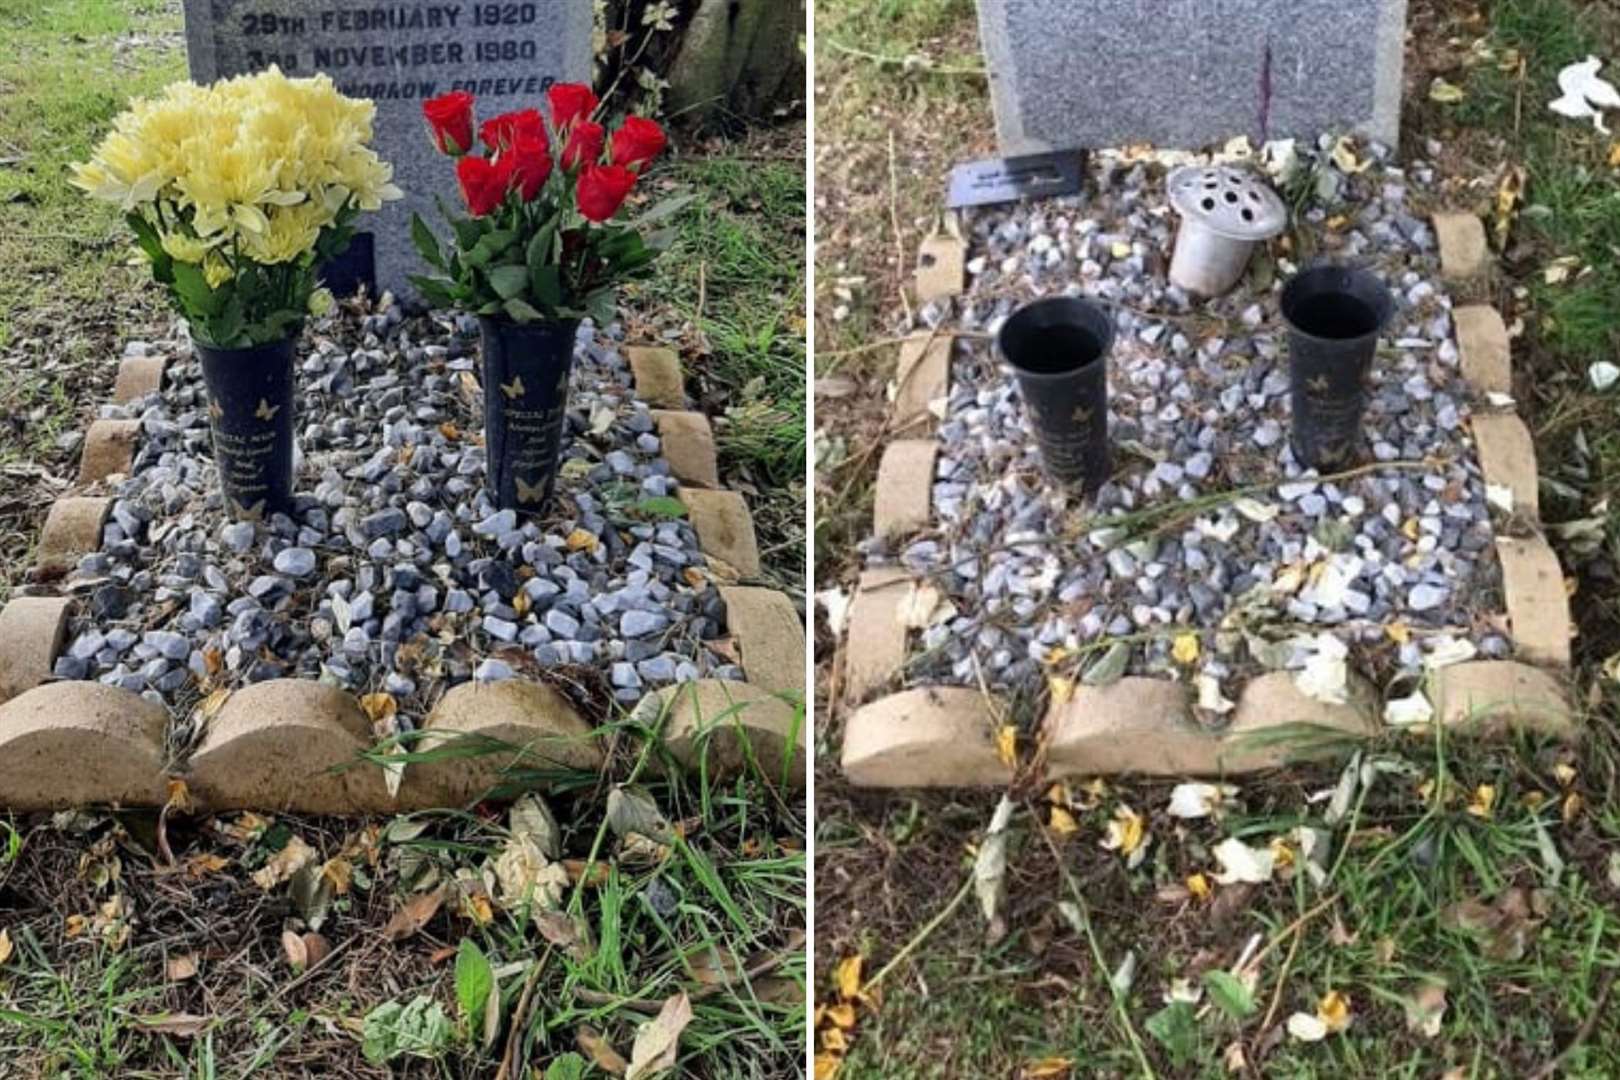 The grave before and after it was trashed